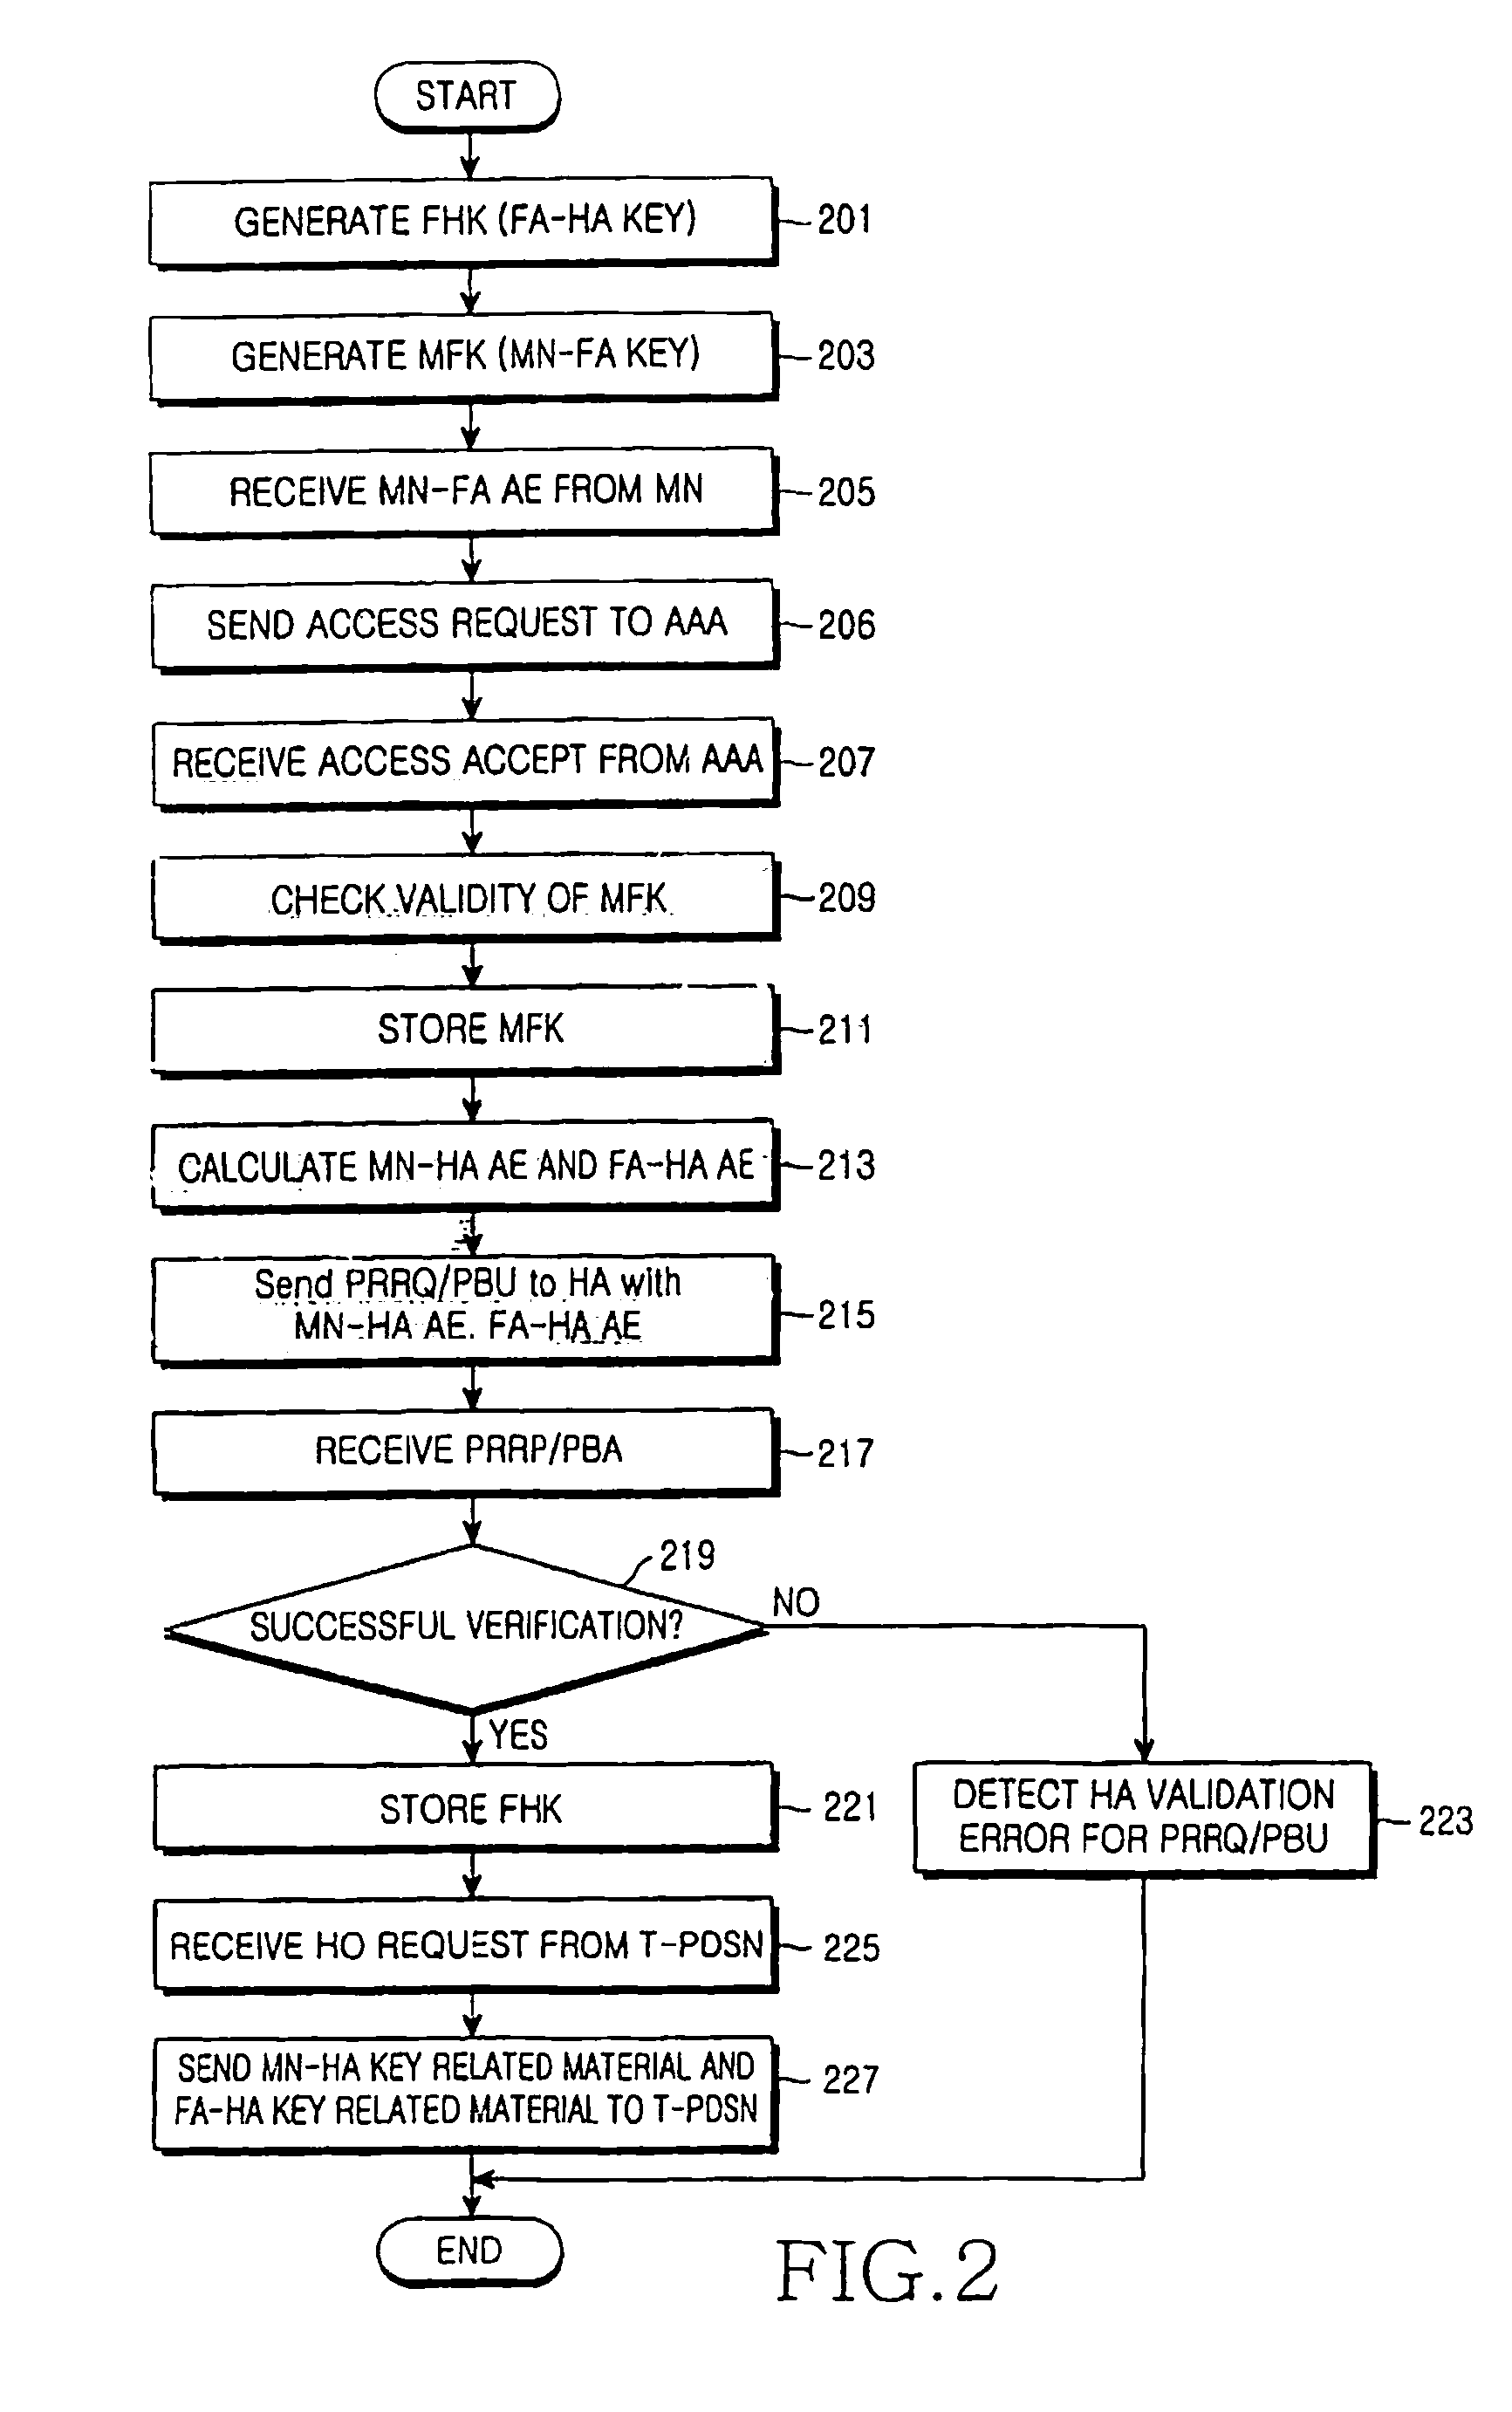 Method for managing security in a mobile communication system using proxy mobile internet protocol and system thereof